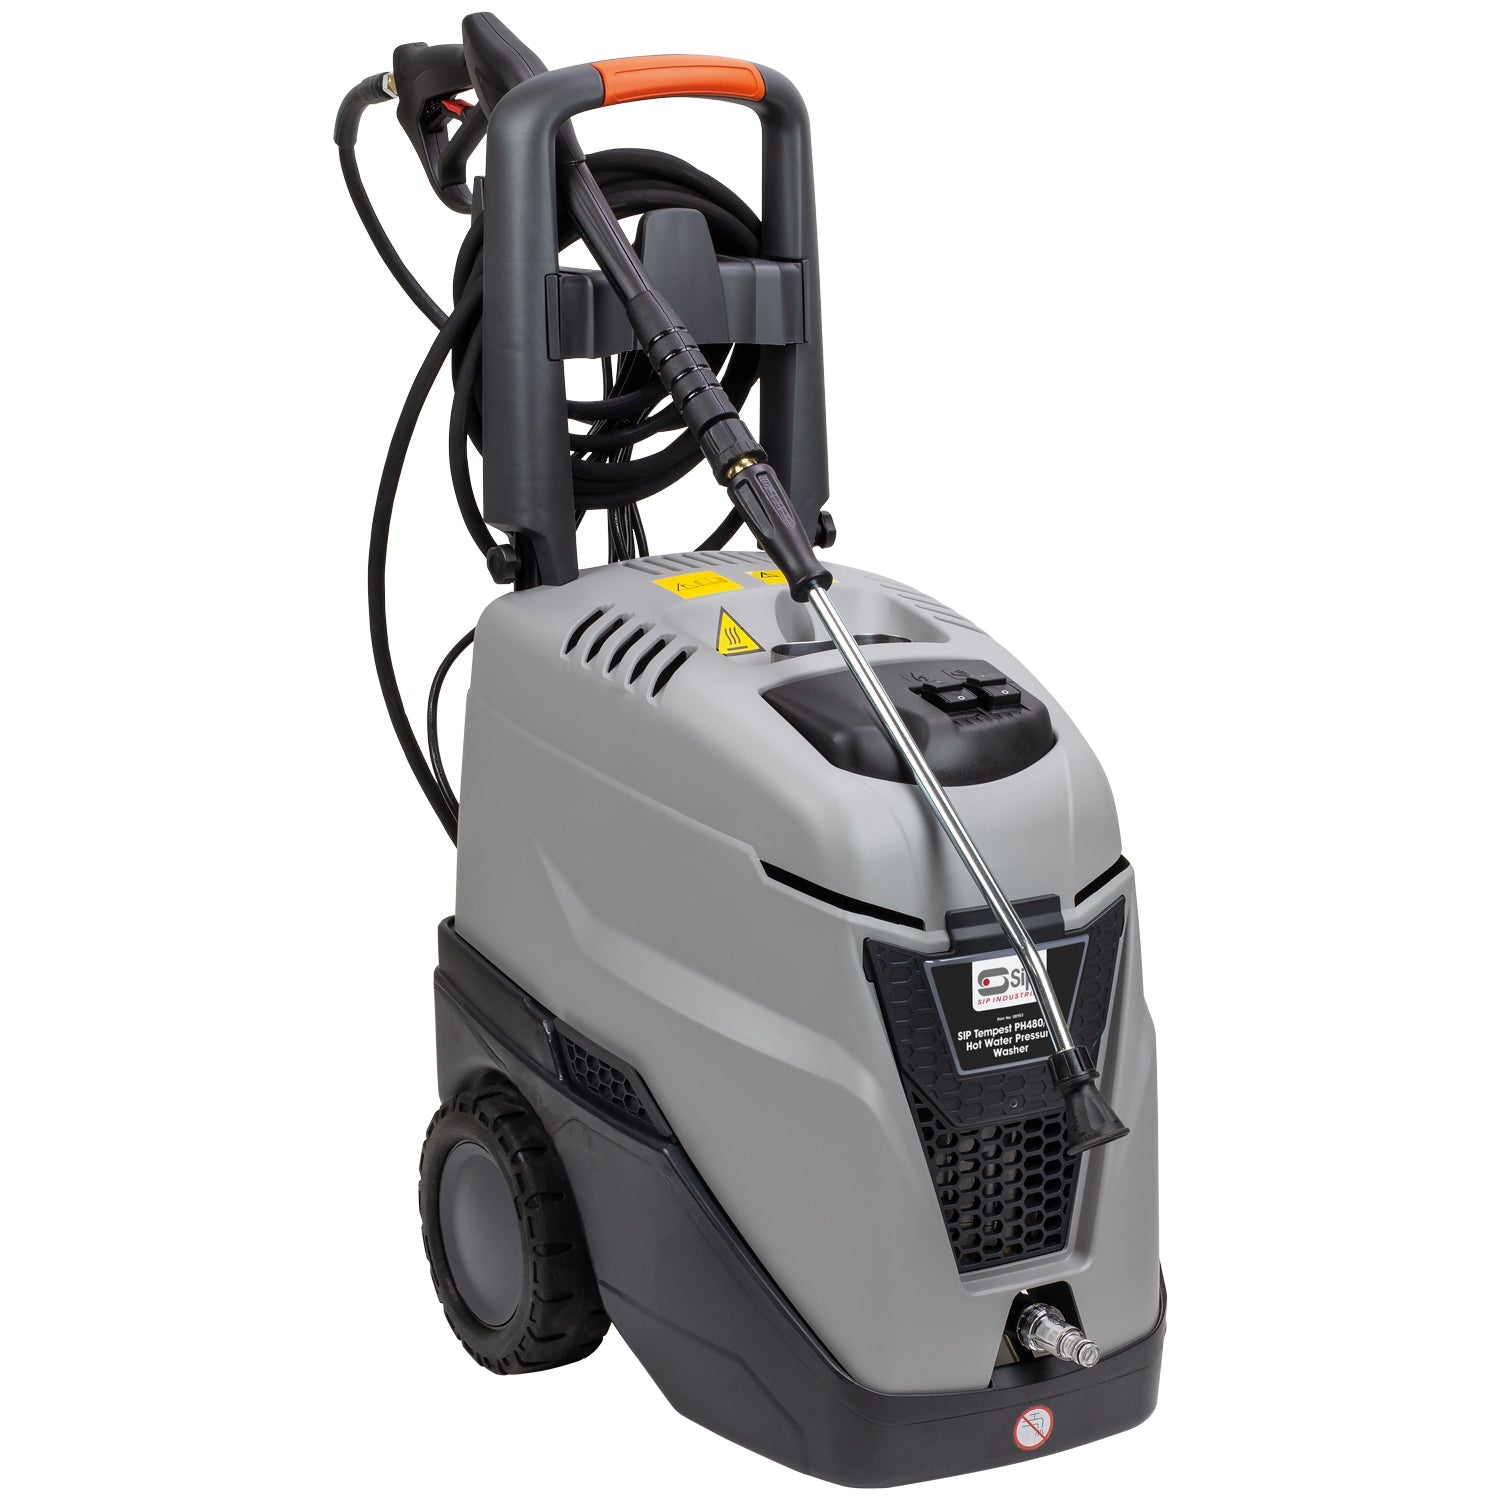 SIP TEMPEST PH480/150 Hot Electric Pressure Washer